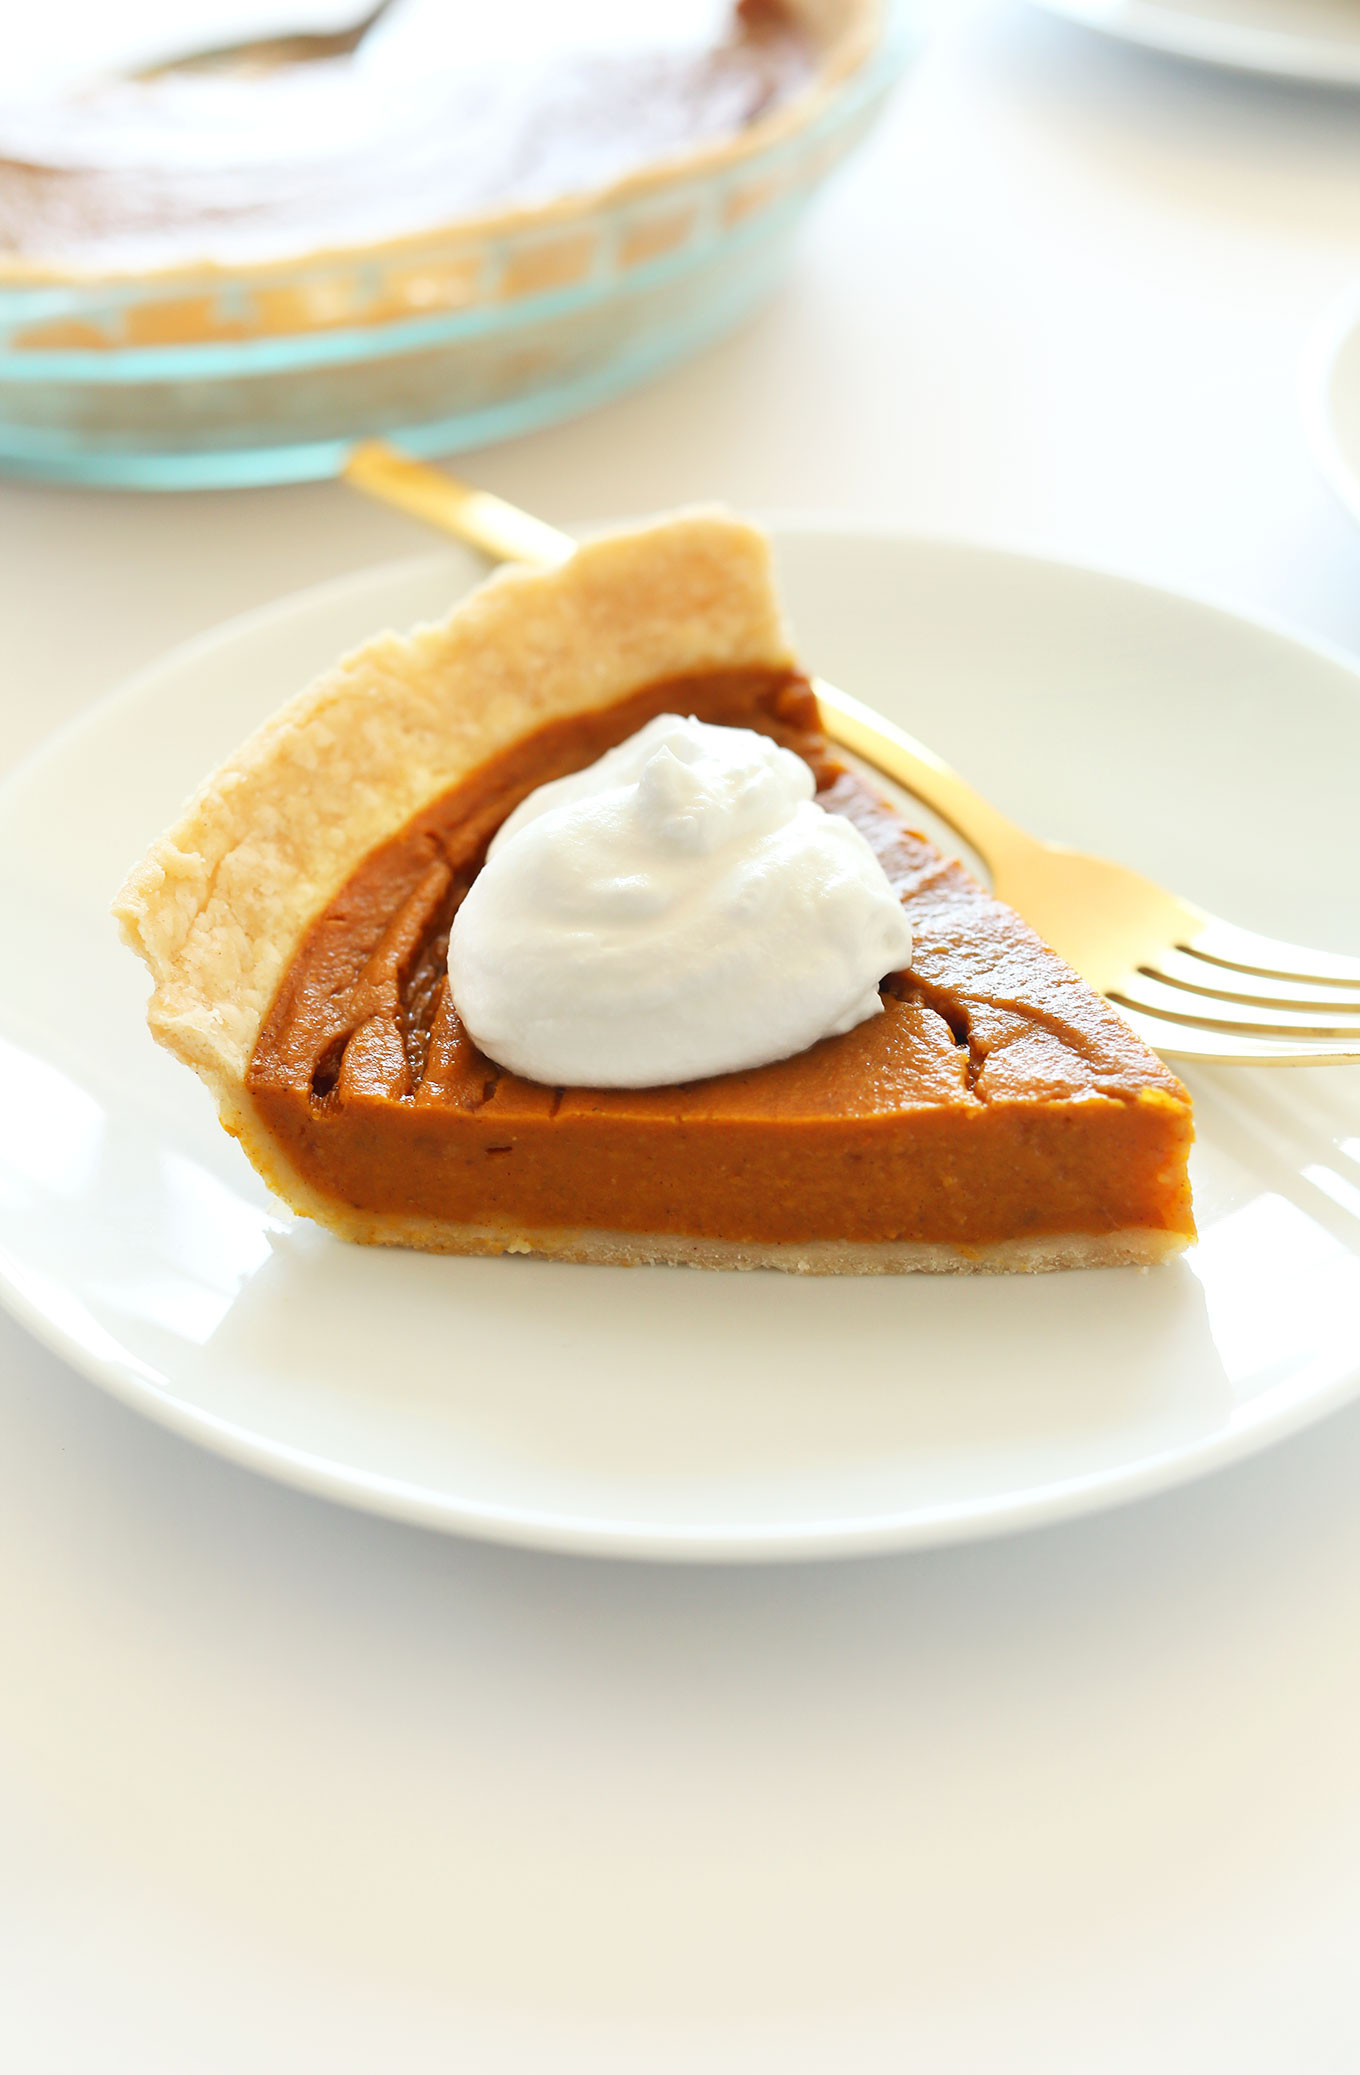 Dairy Free Pie Recipes
 7 Delicious Pie Recipes for Your Gluten Free Holiday Guests